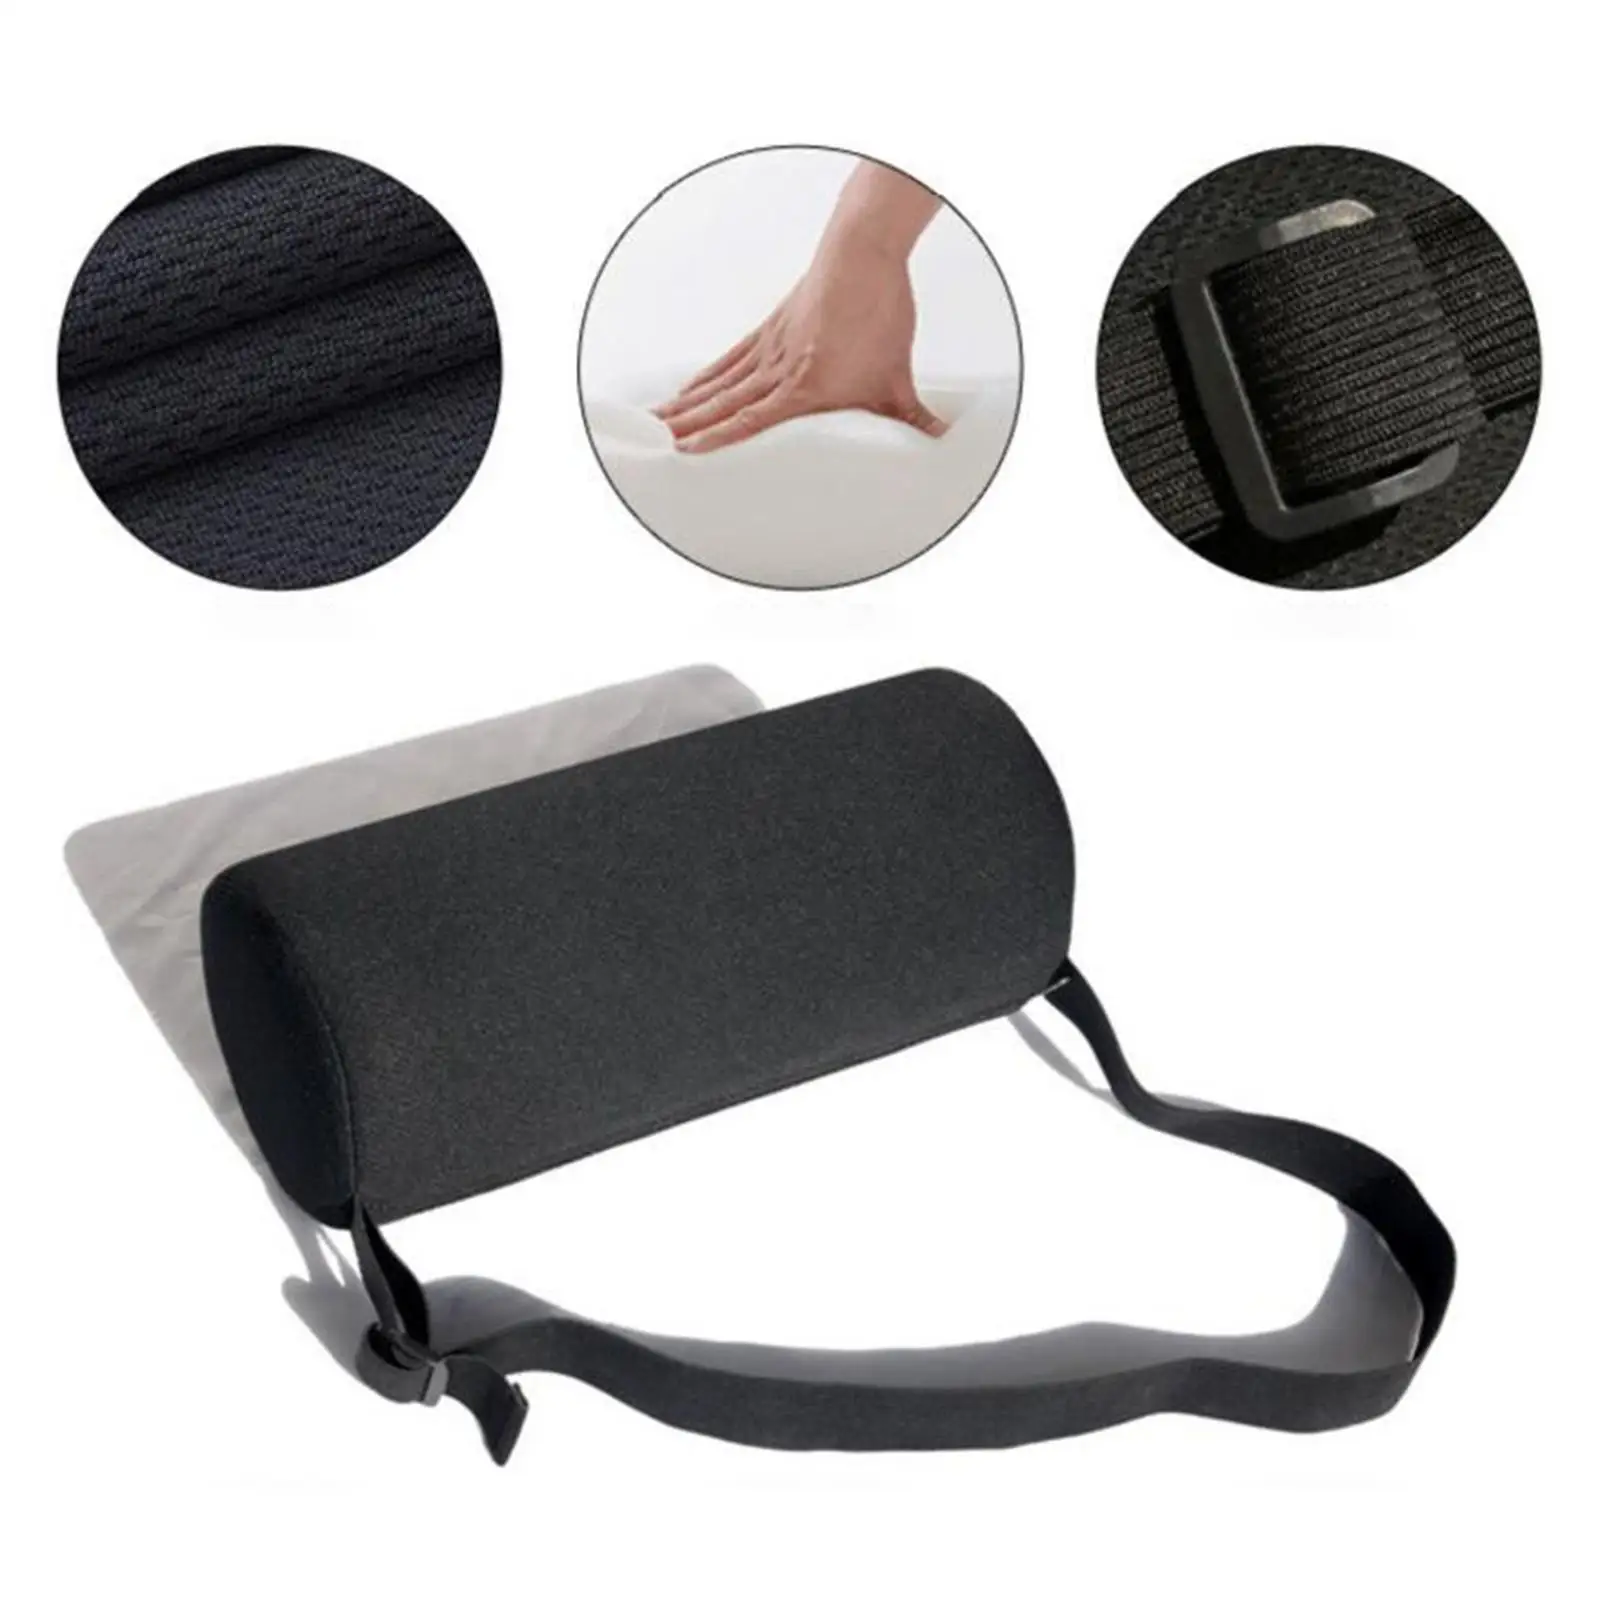 Soft Waist Cushion Lower Back Pillow Adjustable Buckle for Office Workers Easily Clean Convenient Durable Comfortable Breathable